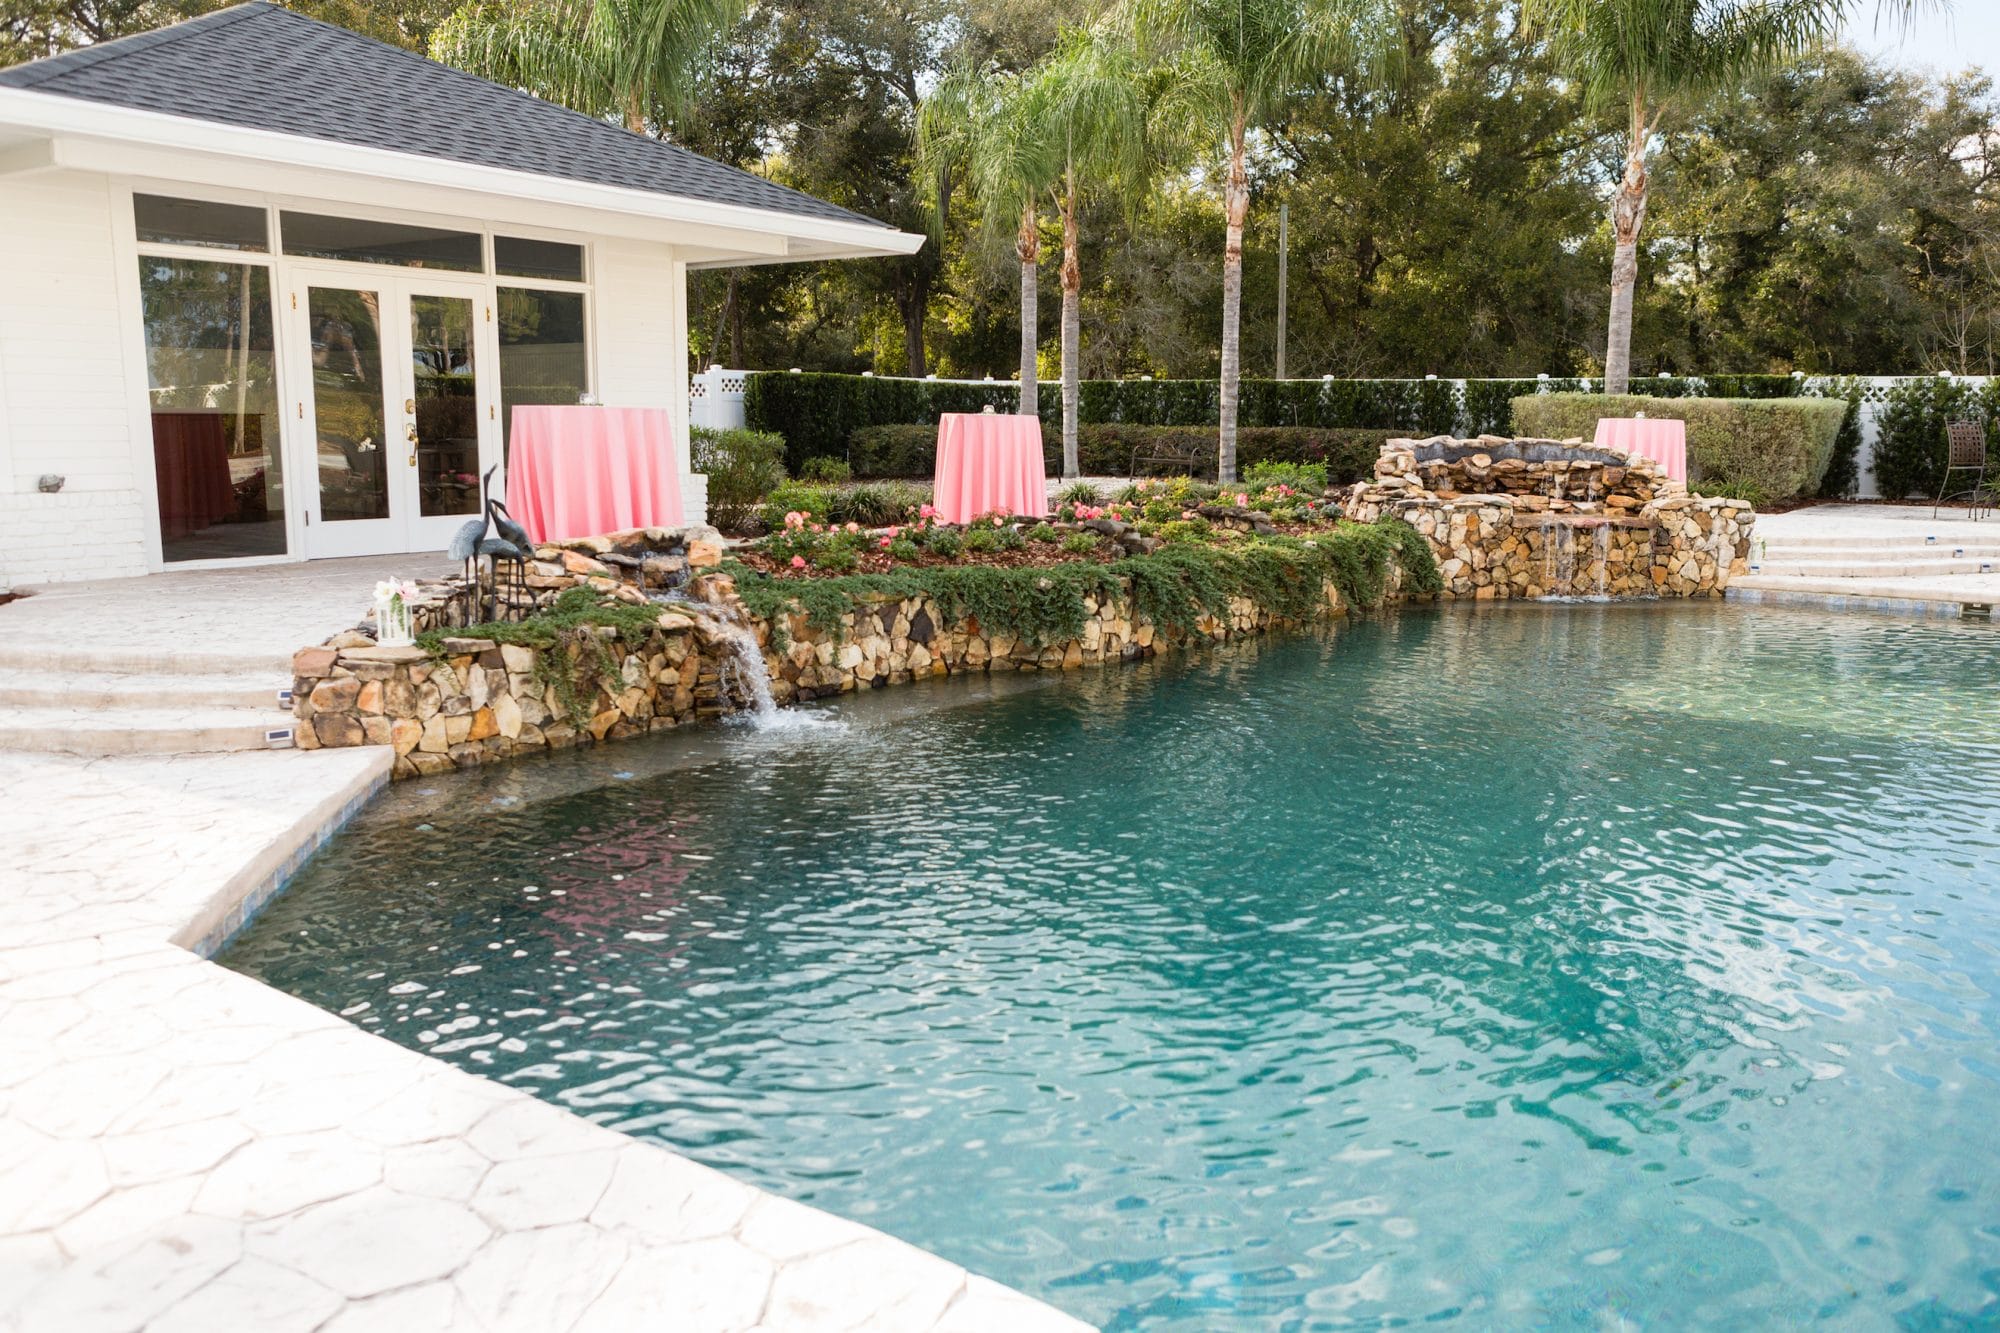 C Squared Events - outdoor pool surrounded by rocks and florals